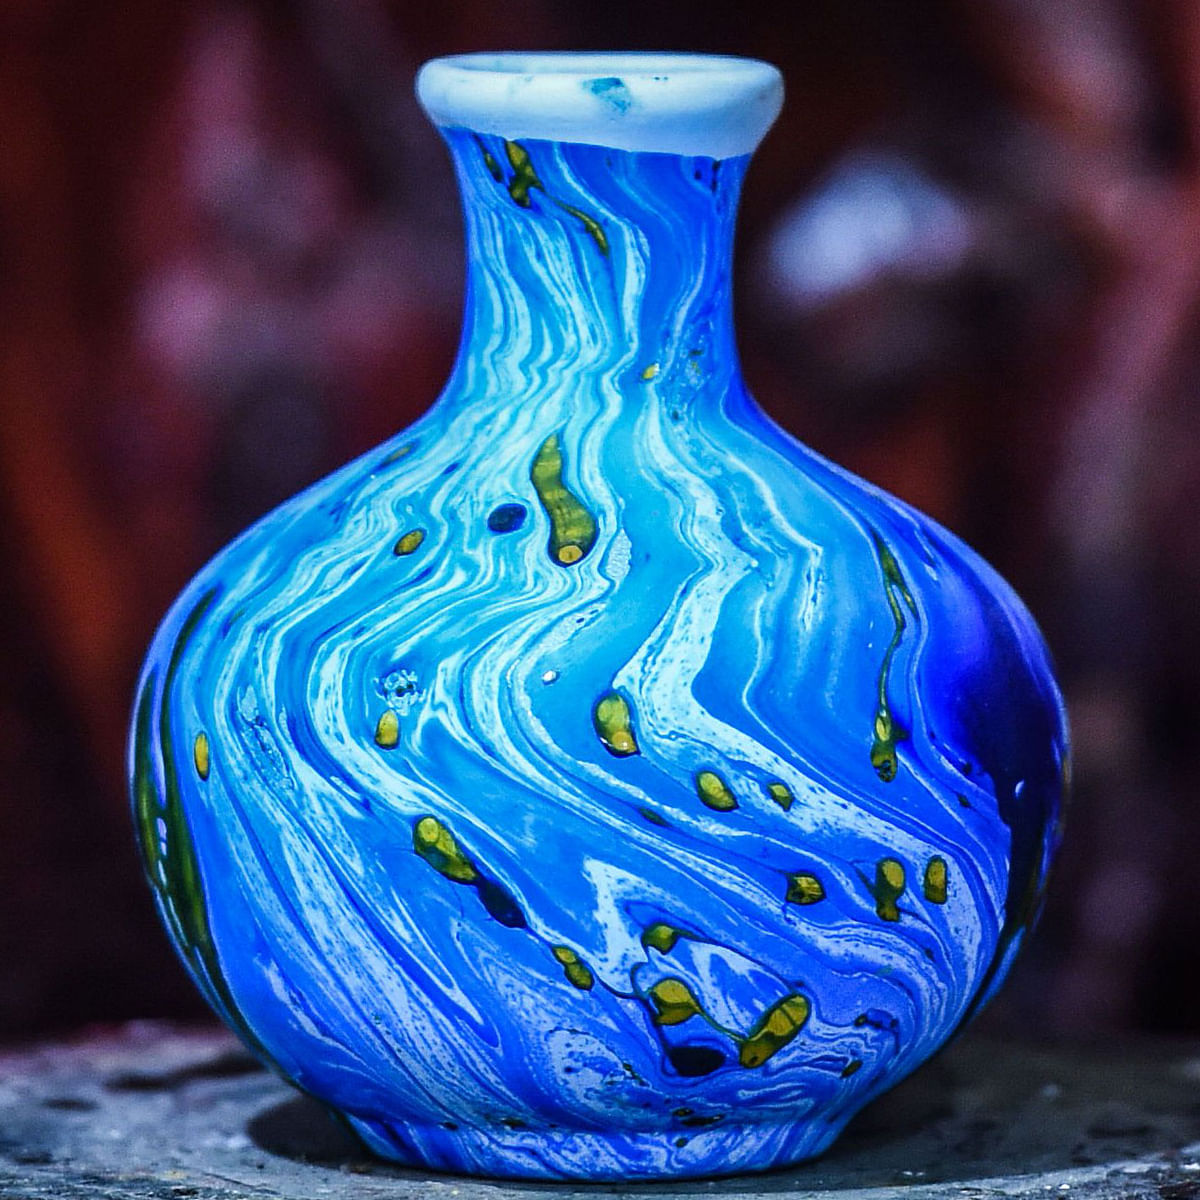 A vase made at Mostafa el-Agoury`s pottery workshop in the village of Shamma in Egypt`s Nile Delta Menoufiya province, is photographed on 21 June 2018. Photo: AFP